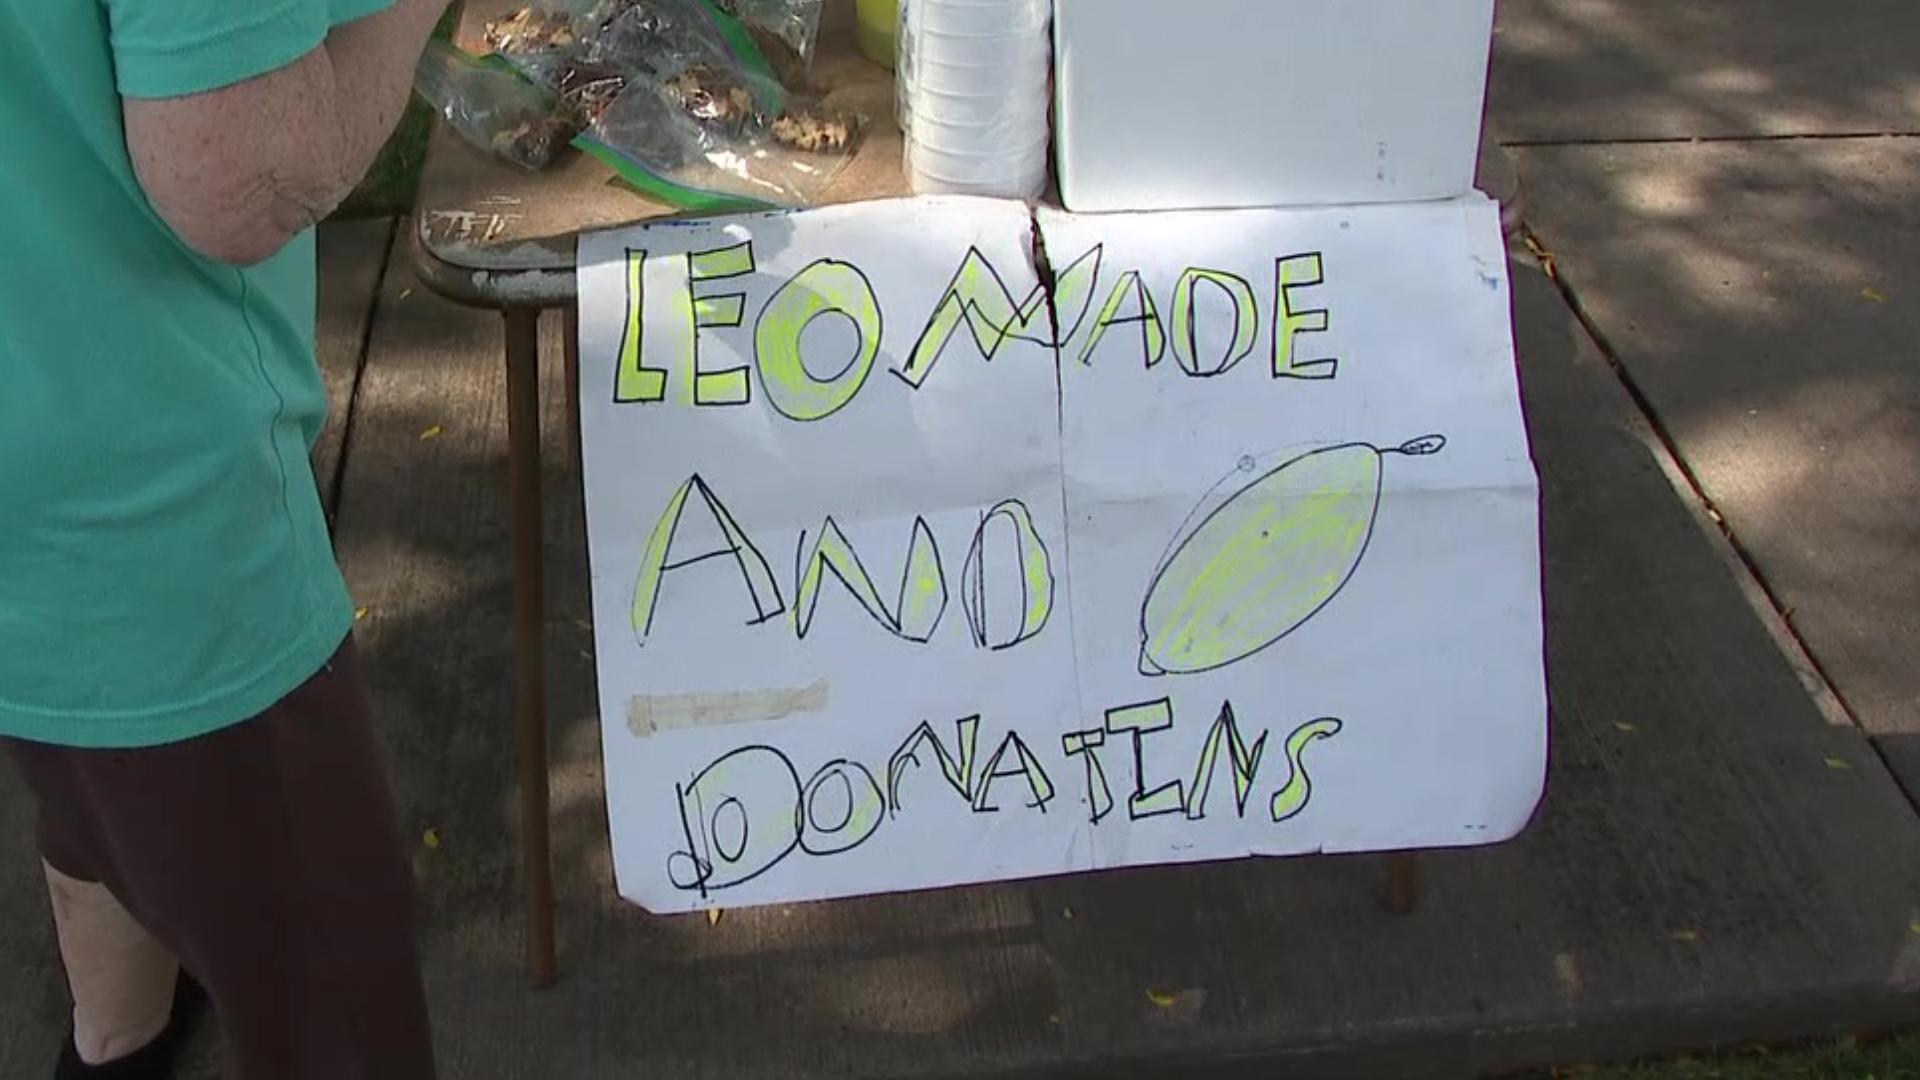 It's the perfect weather for some ice-cold lemonade, and a boy from Middleburg had the right idea. But the money isn’t for a new toy or video game.